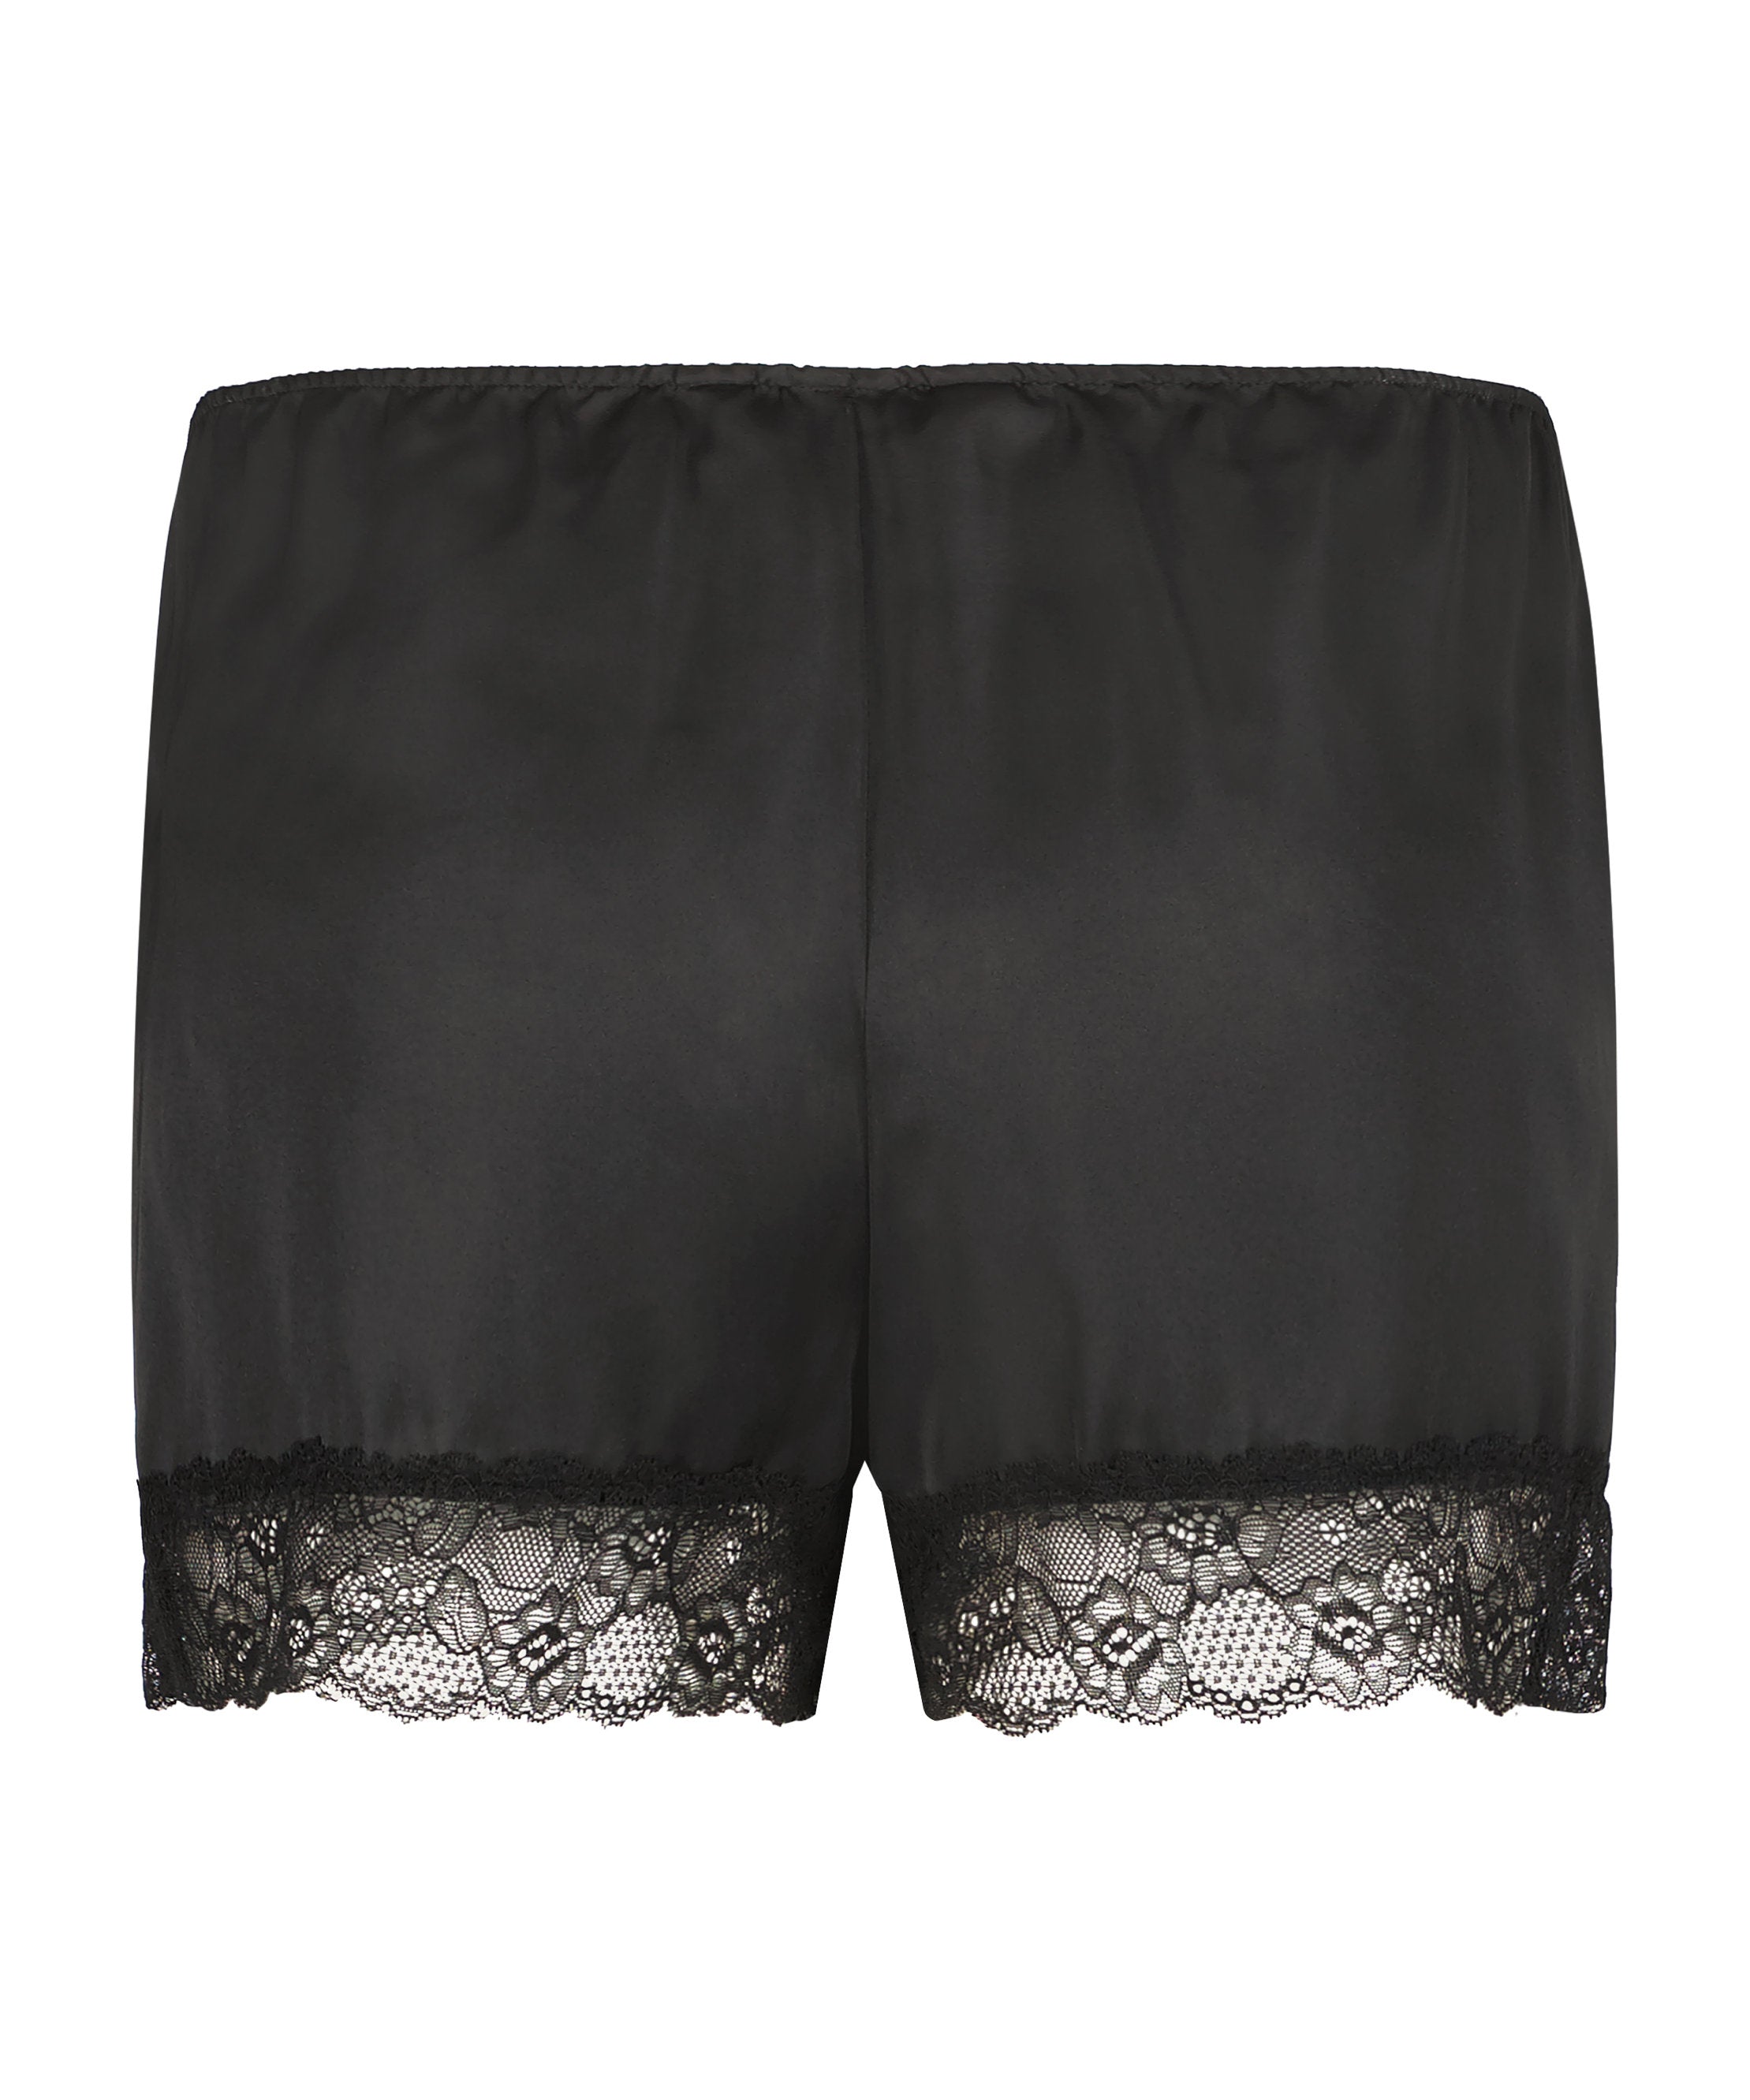 Meili Satin Shorts With Lace Trim_194796_Black_05